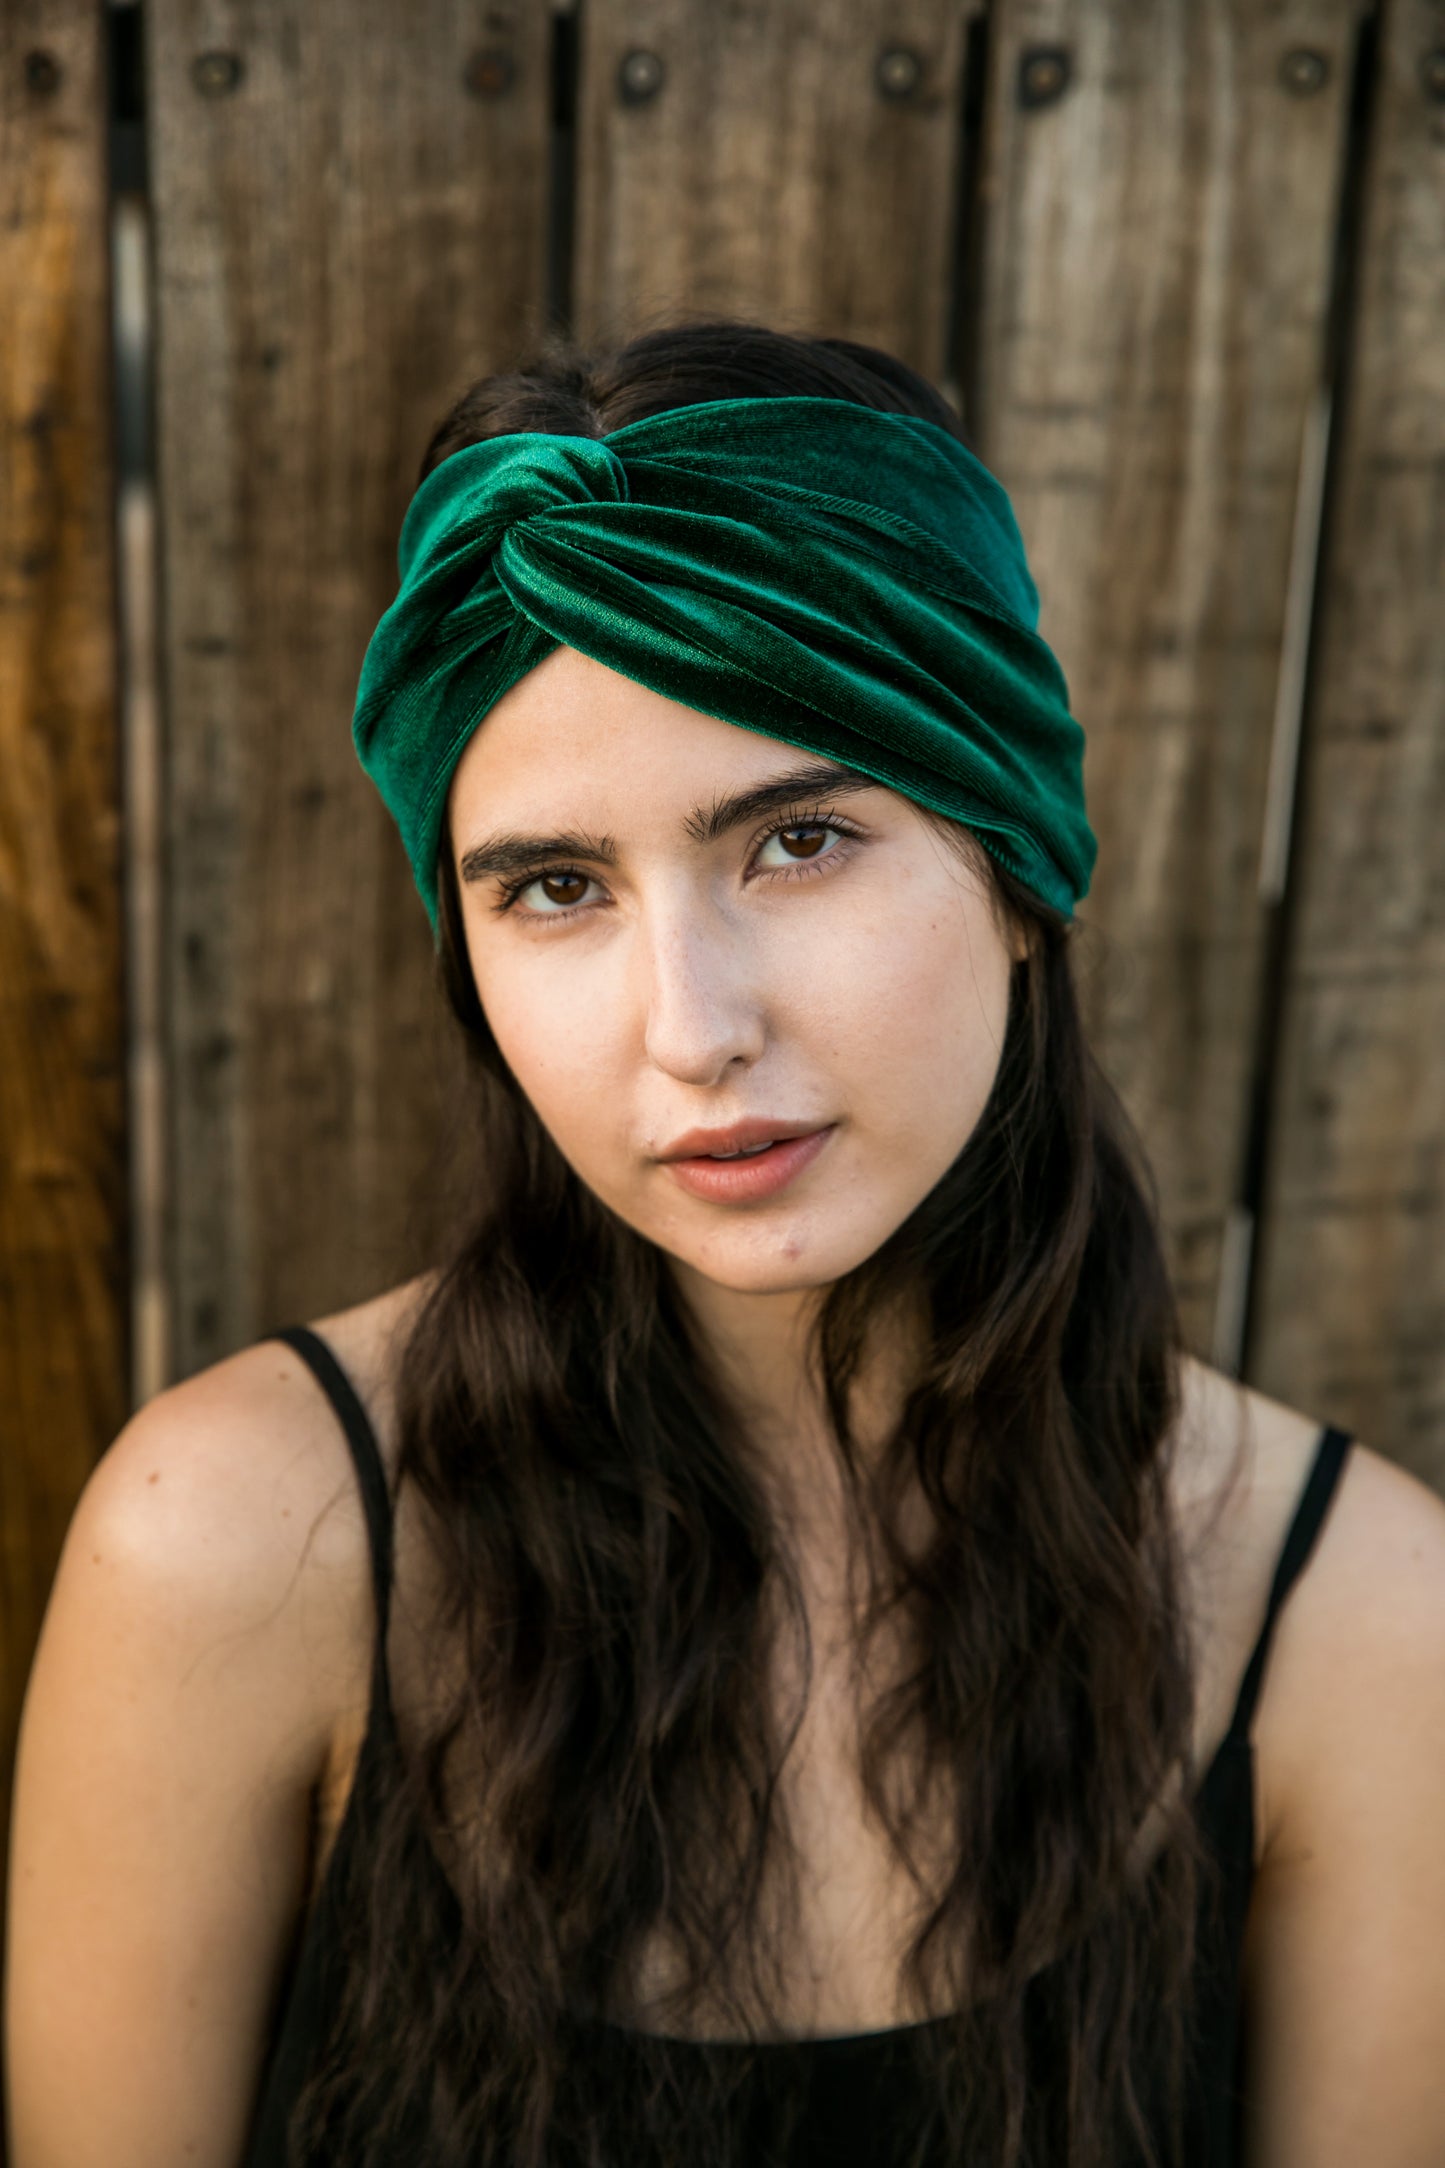 Wide, emerald green stretch velvet turban-esque fashion headband, with an elegant twist front and center. Vintage-inspired retro 1920s mixed with a modern fabric.